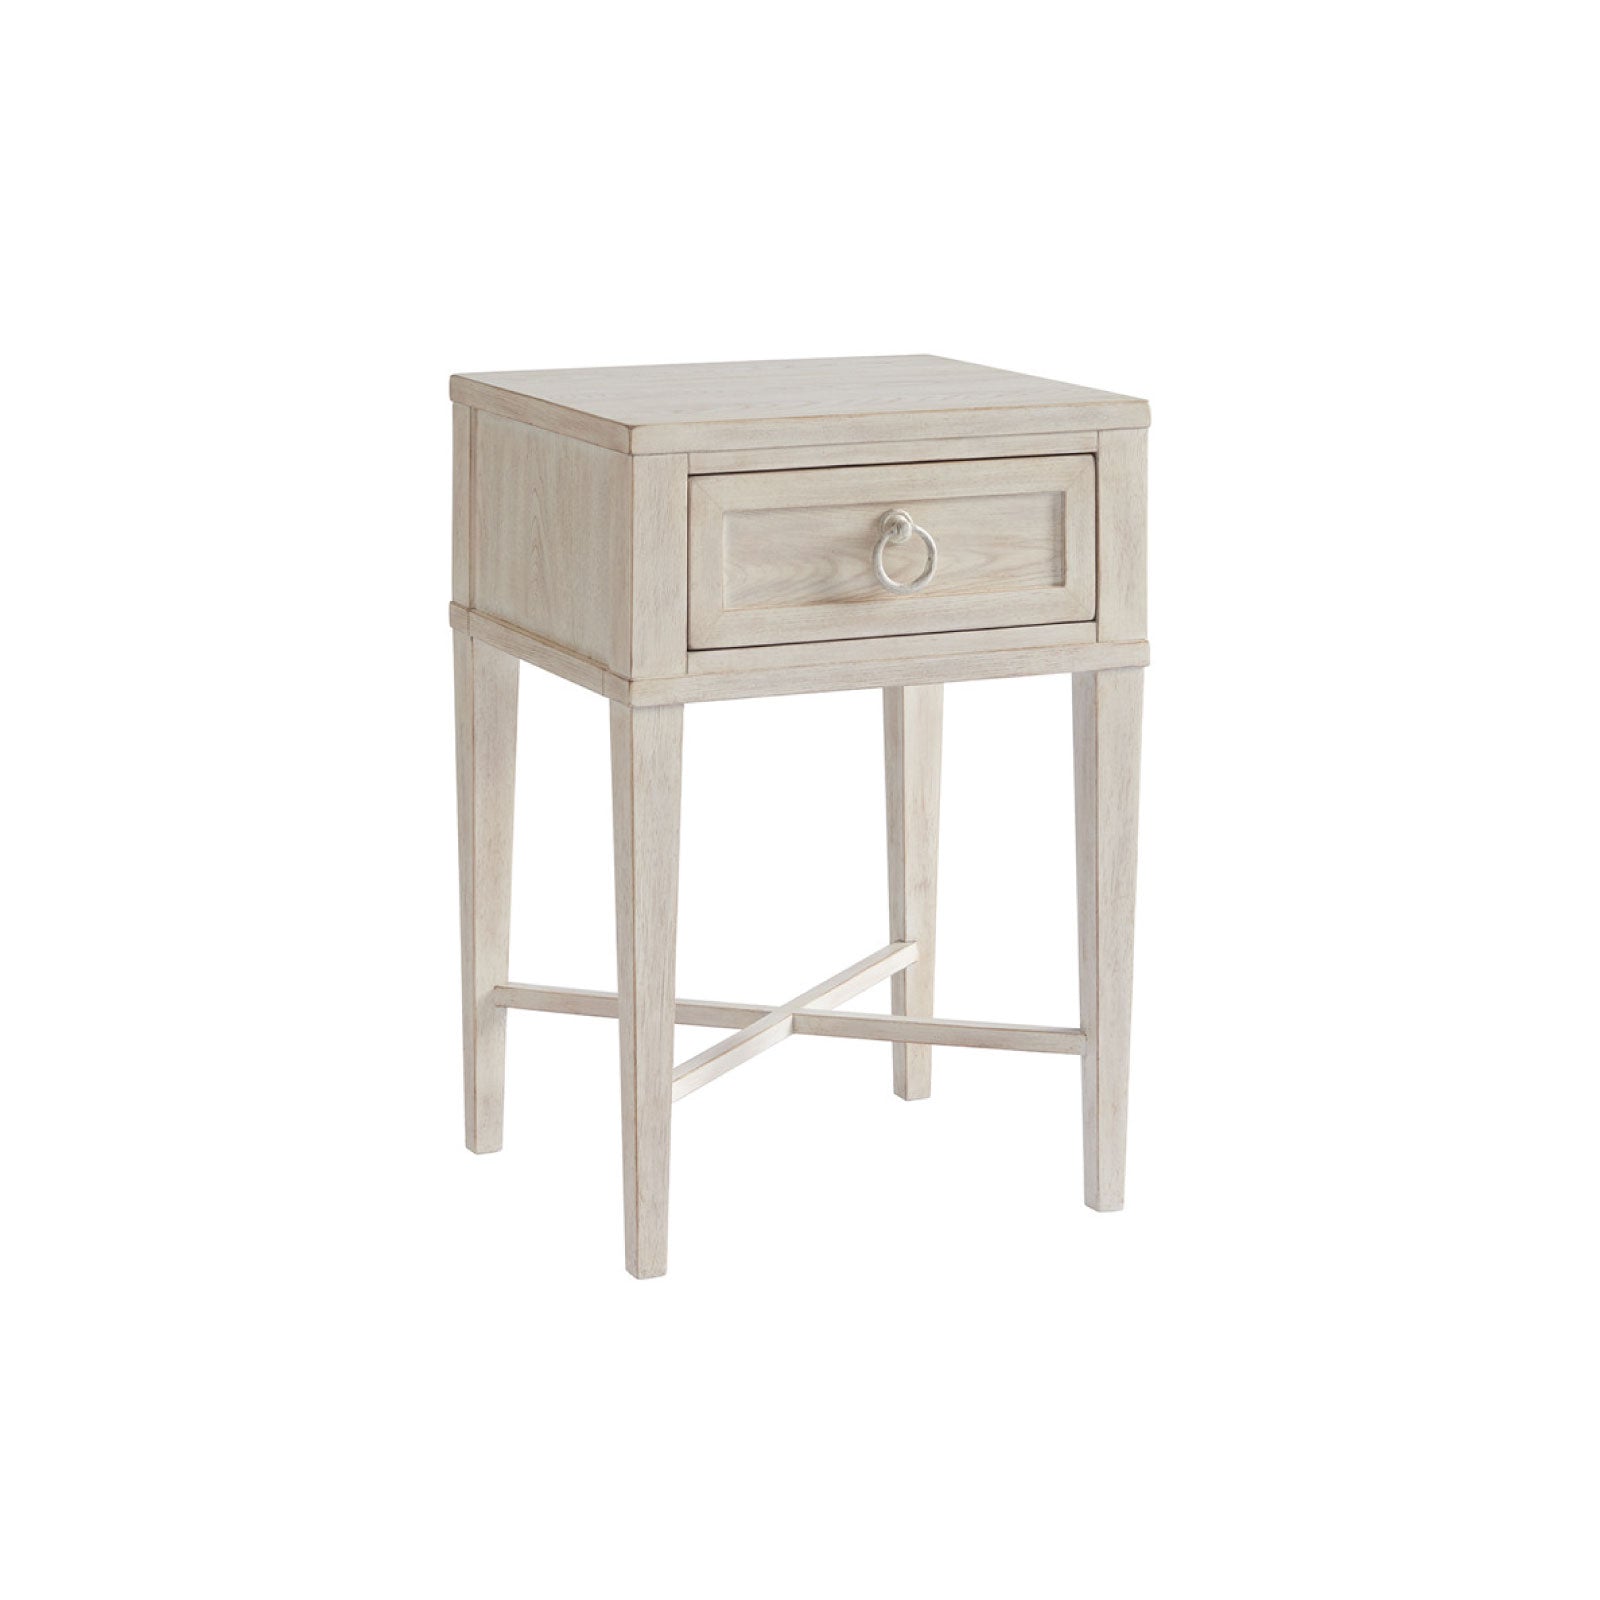 Wood nightstand with a light finish. One drawer with a white circular drawer pull